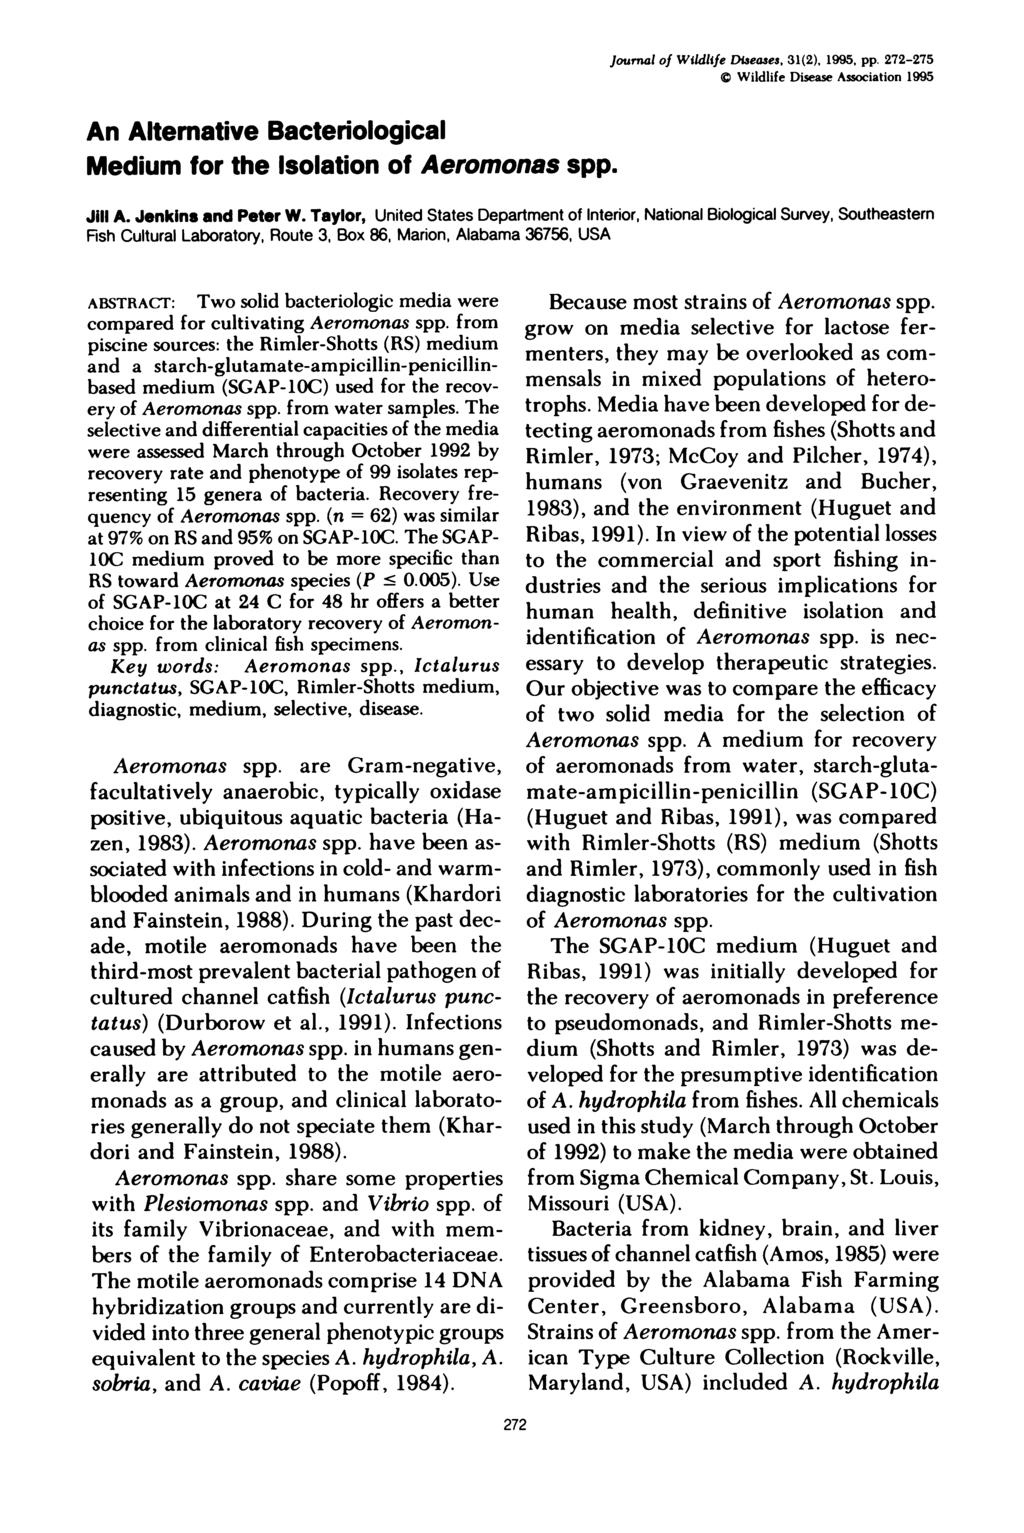 Journal of Wildlife Diseases, 31(2), 1995, pp. 272-275 Wildlife Disease Association 1995 An Alternative Bacteriological Medium for the Isolation of Aeromonas spp. Jill A. Jenkins and Peter W.